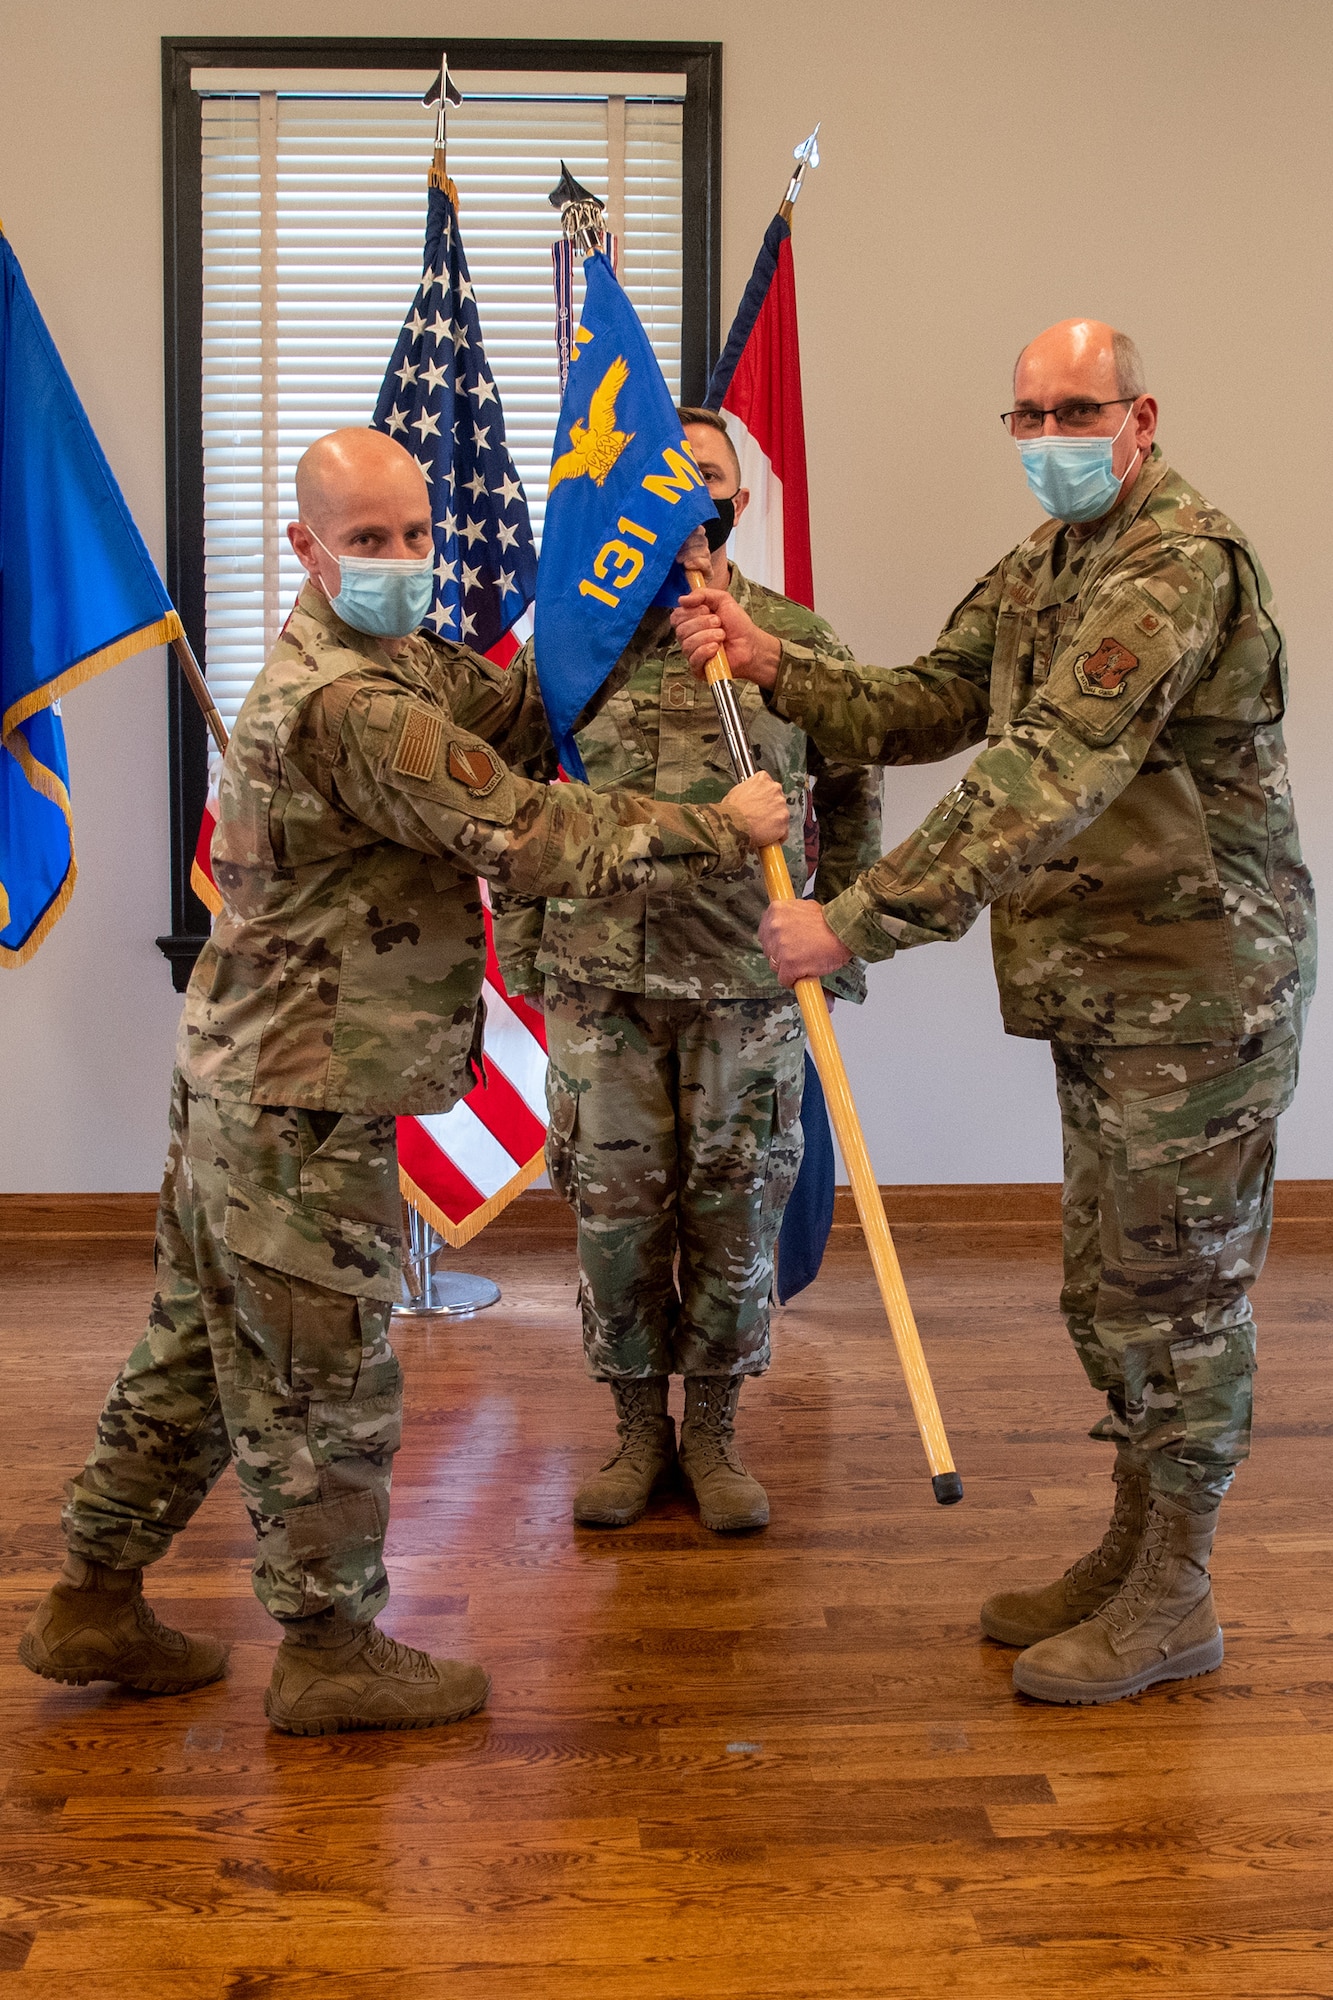 Col. Matthew Calhoun, left, commander of the 131st Bomb Wing, passes the 131st Mission Support Group (MSG) guidon to Col. William Miller at Jefferson Barracks Air National Guard Base, St. Louis, Missouri, Jan 9, 2022. Miller assumed command of the group during January drill. (U.S. Air National Guard photo by Airman 1st Class Whitney Erhart)